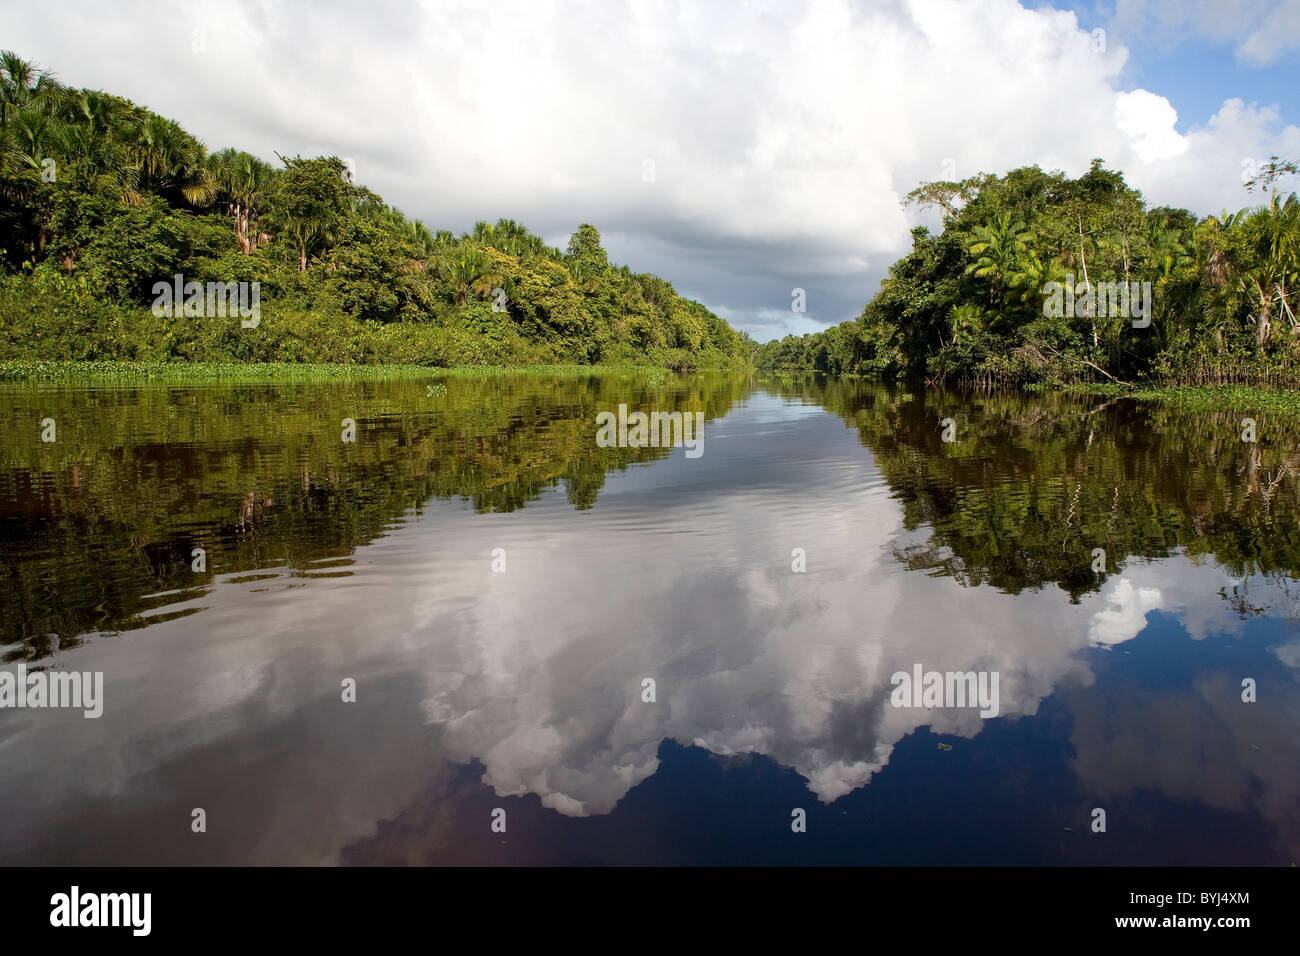 Landscape Photograph Of Orinoco Rivers Coastline Vegetation Blue Sky And White Clouds Reflected On The Mirror Like waters Stock Photo